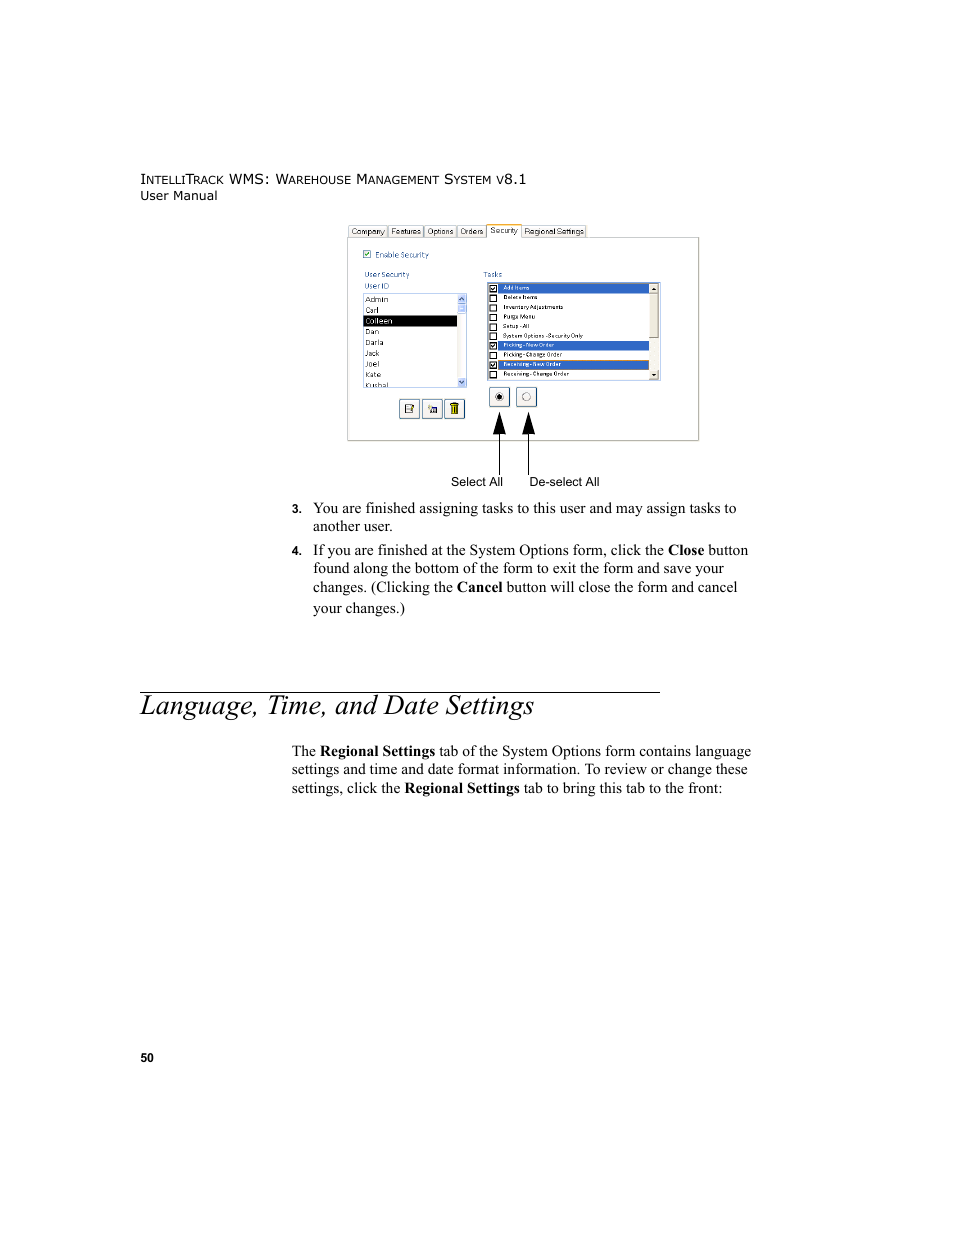 Language, time, and date settings | IntelliTrack WMS – Warehouse Management System User Manual | Page 76 / 466